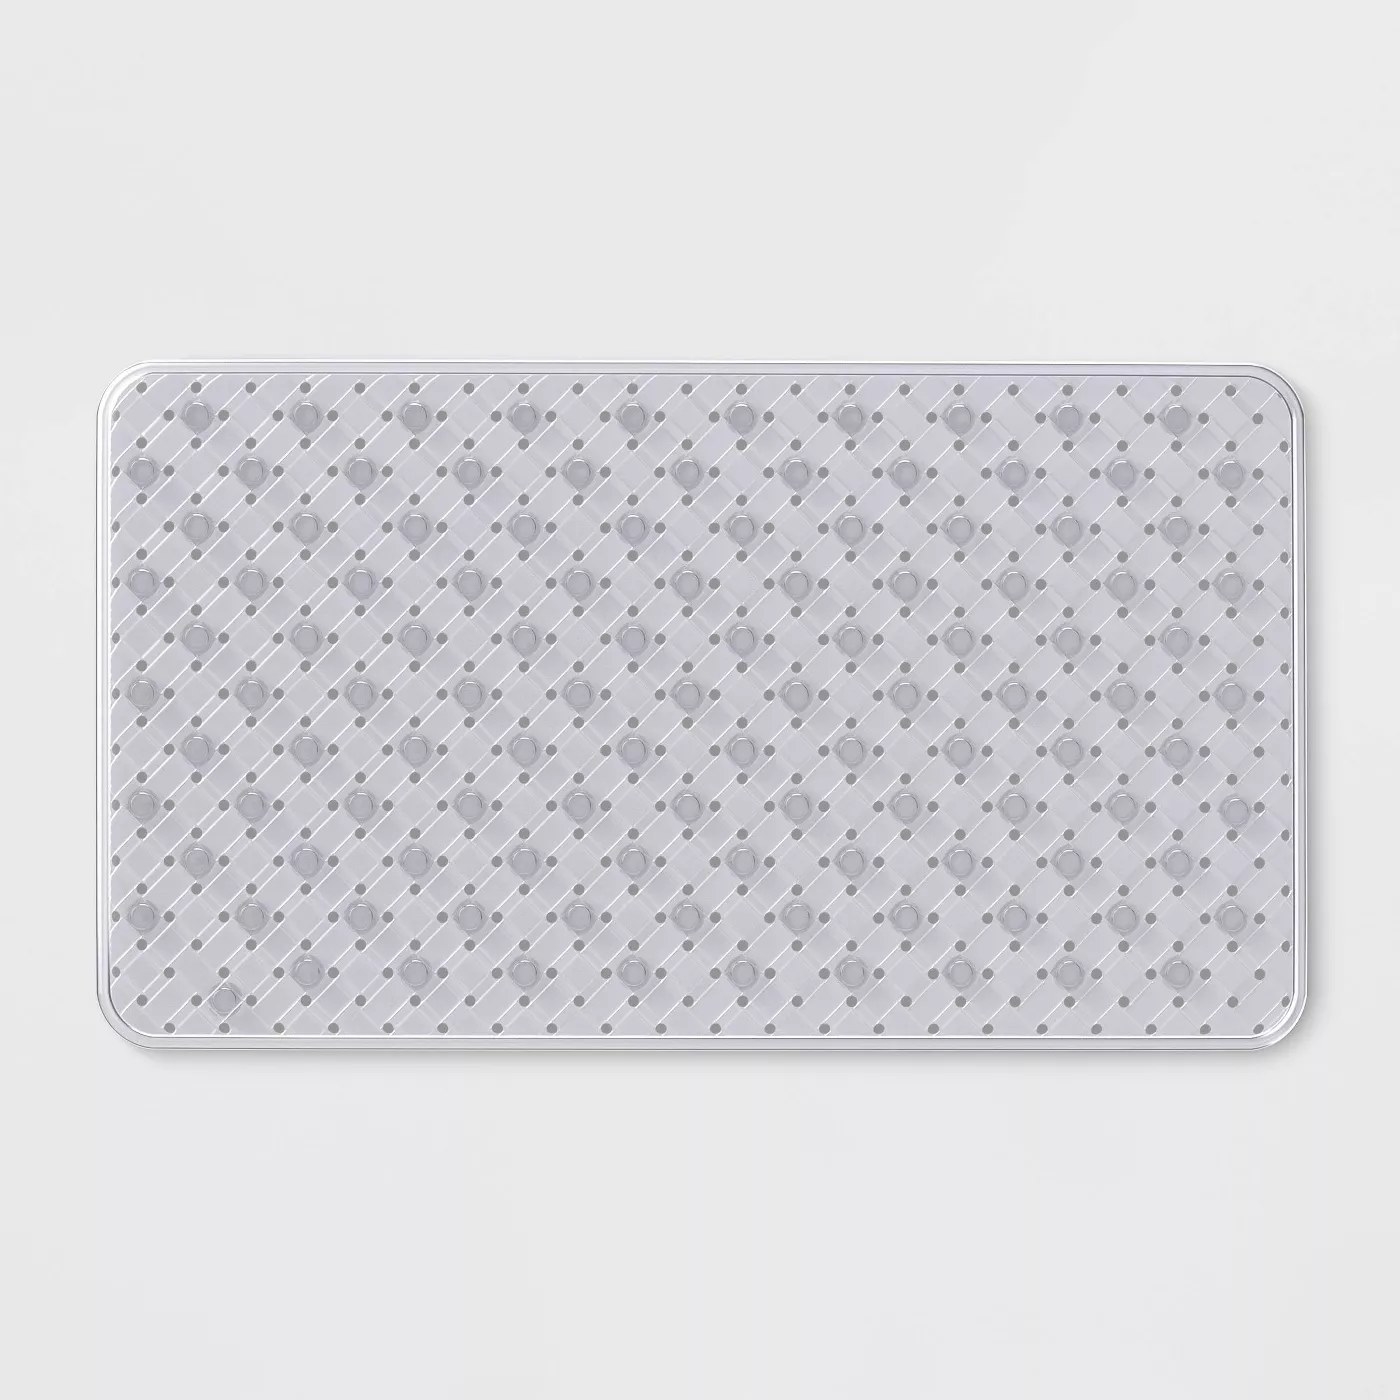 The clear bath mat has beautiful woven detailing and is in a large rectangular shape